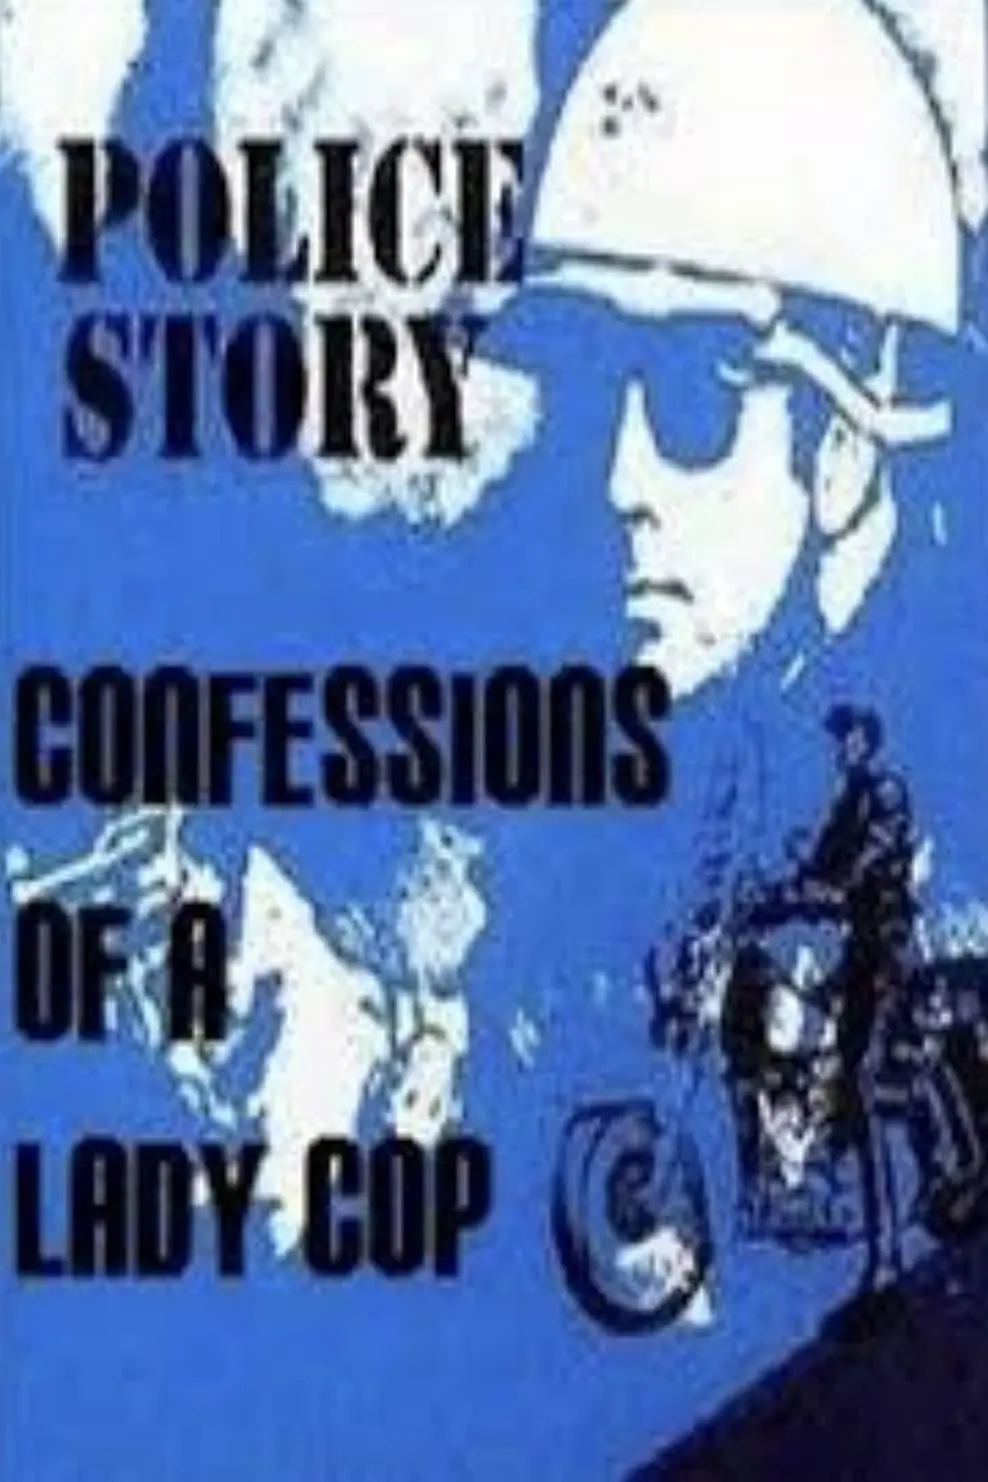 Police Story: Confessions of a Lady Cop_peliplat